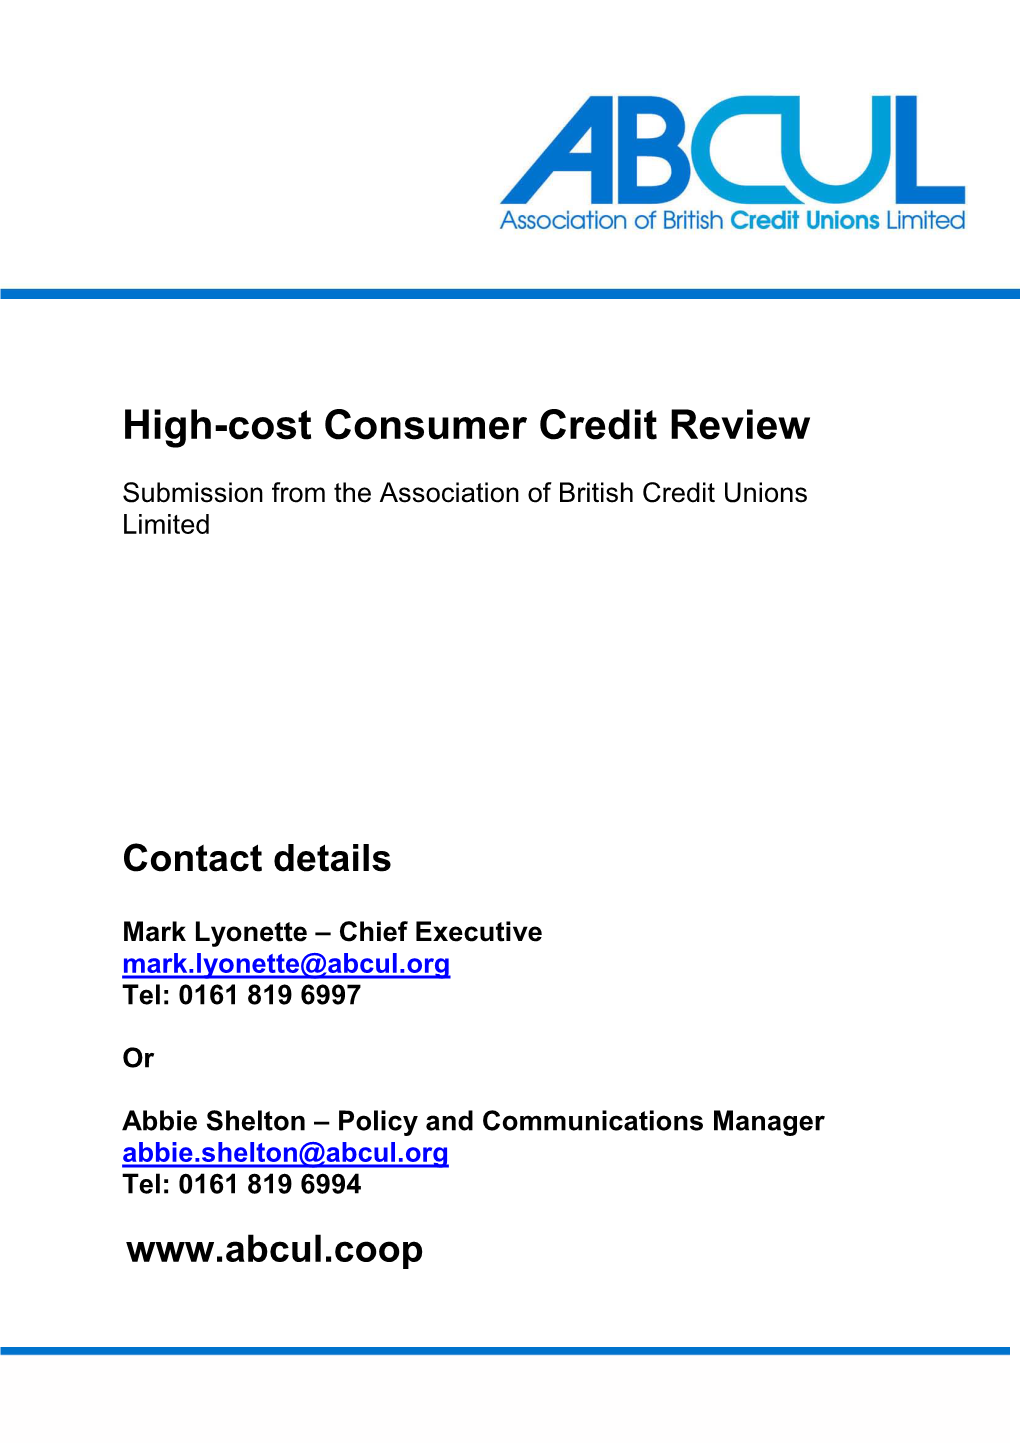 High-Cost Consumer Credit Review